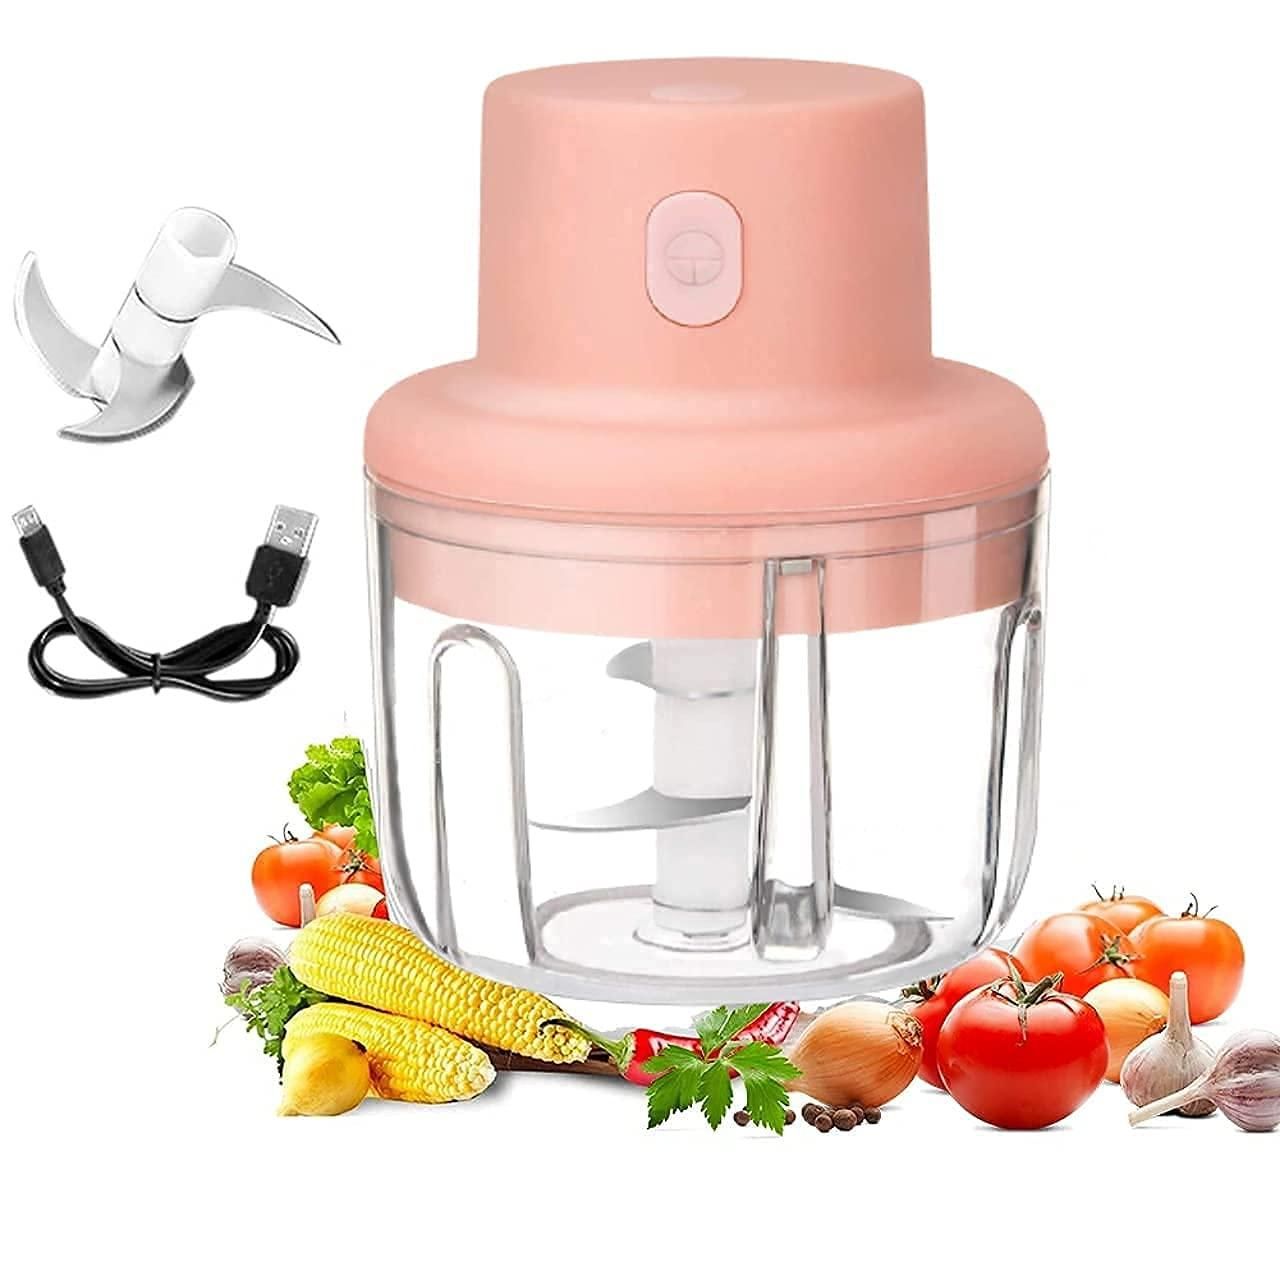 Effortlessly Chop Vegetables Anywhere with Our Portable USB Rechargeable Electric Chopper!